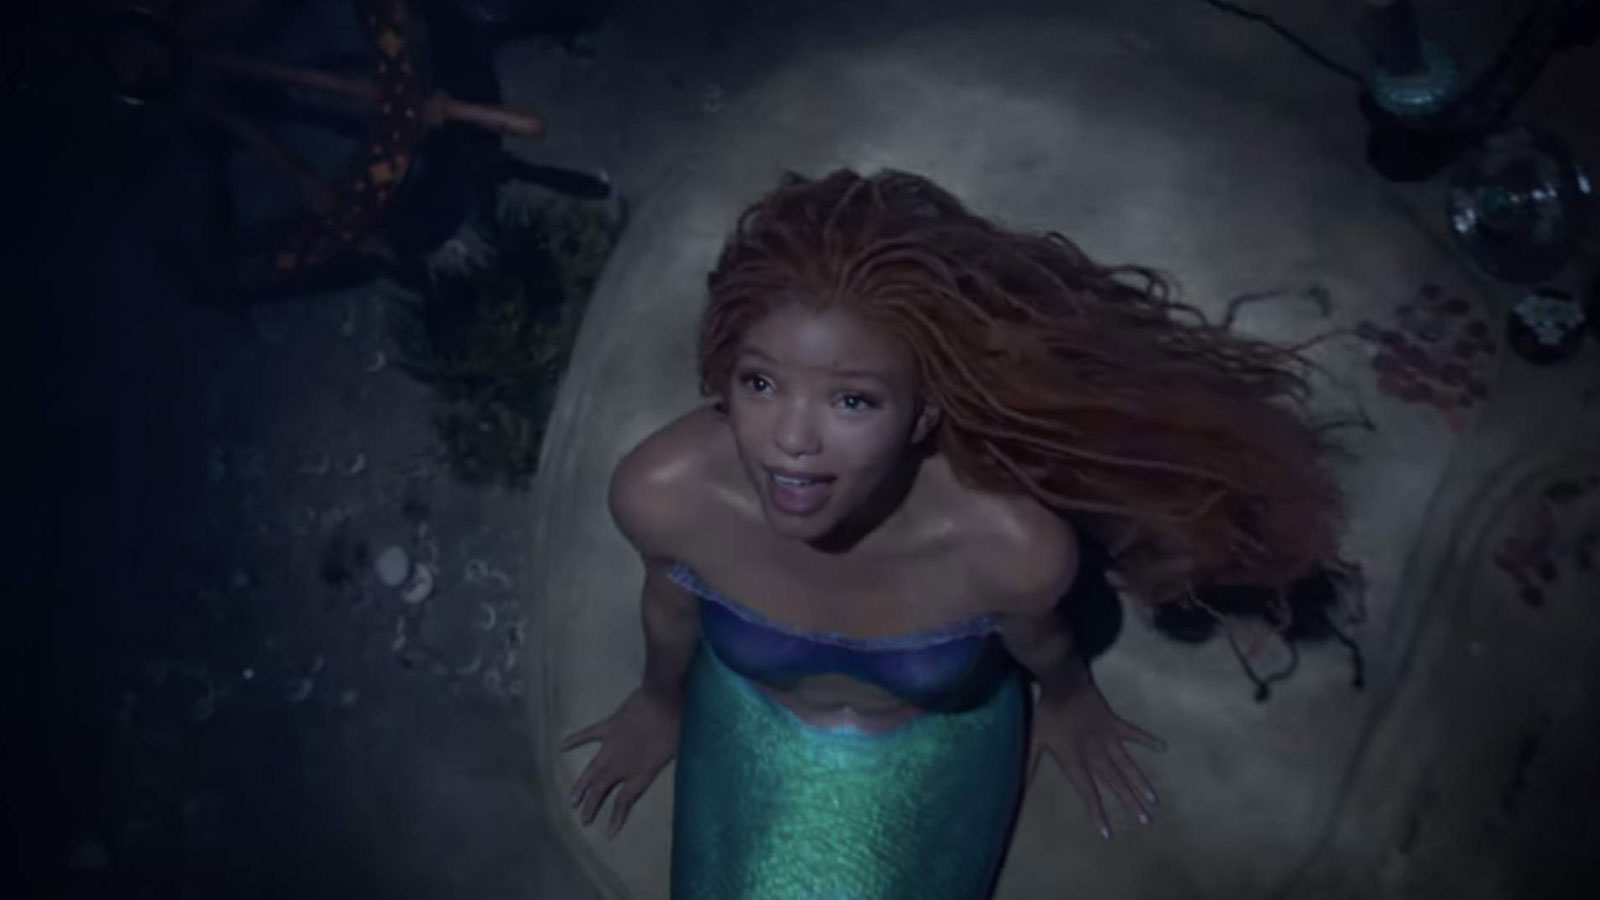 The racist backlash over increased diversity in The Little Mermaid and Lord of the Rings, explained